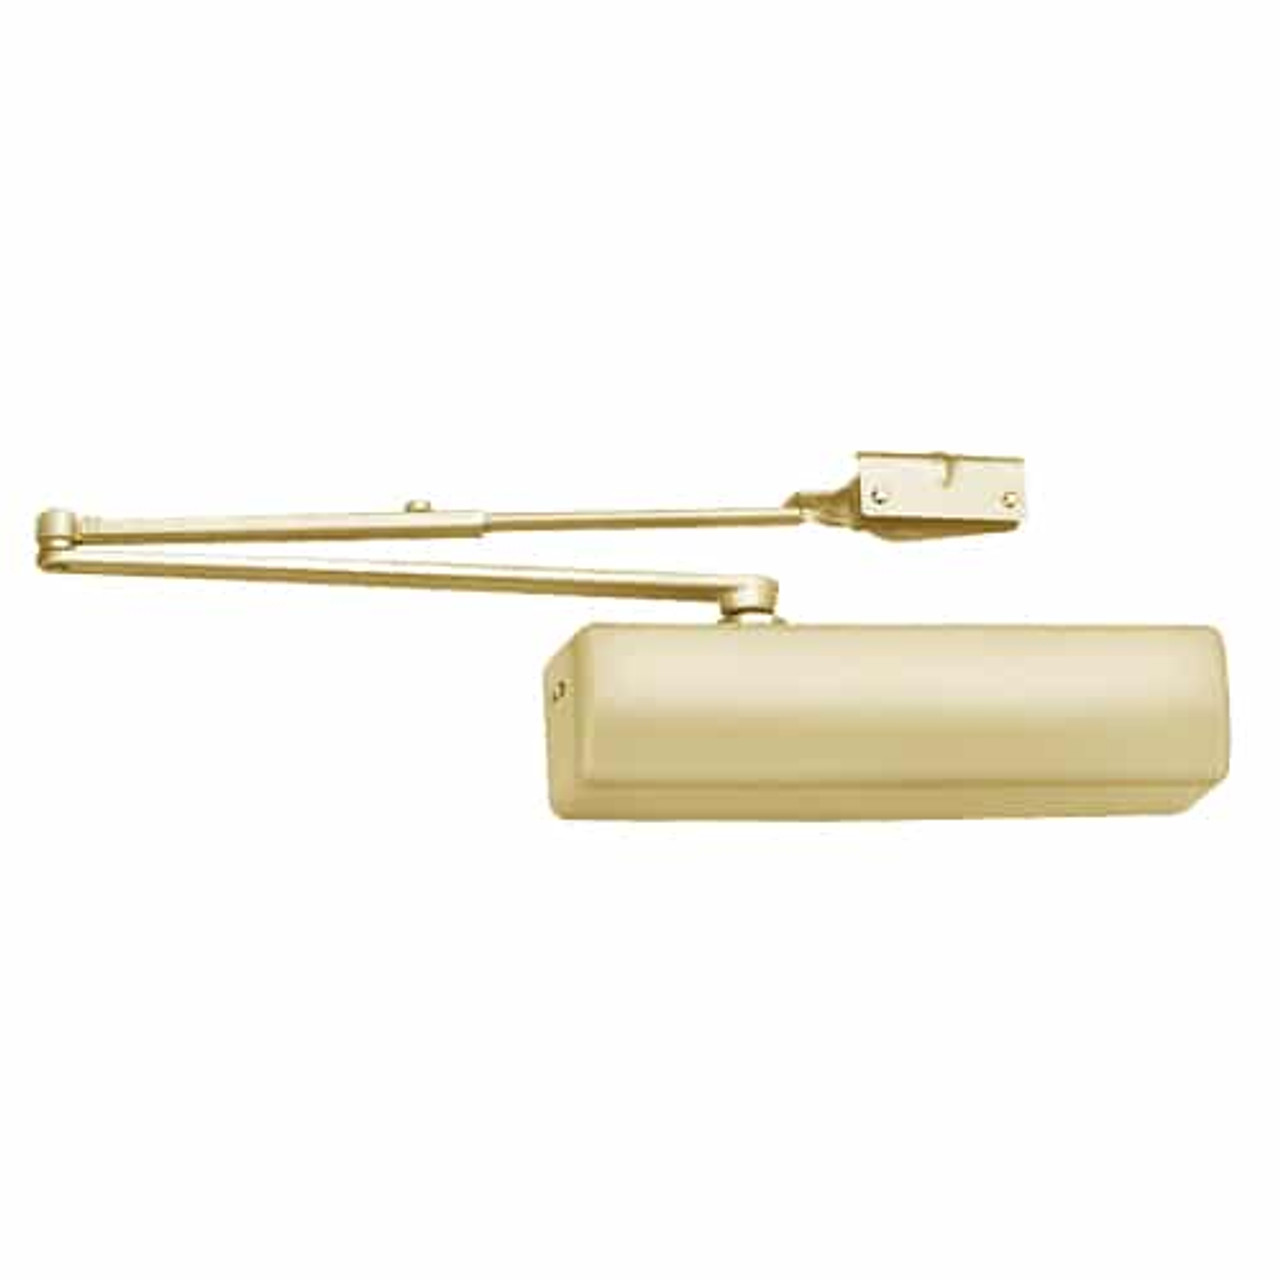 DC6210-A2-696 Corbin 6000 Series Multi-Sized Heavy-Duty Parallel Arm Door Closers with Hold Open Arm in Satin Brass Finish